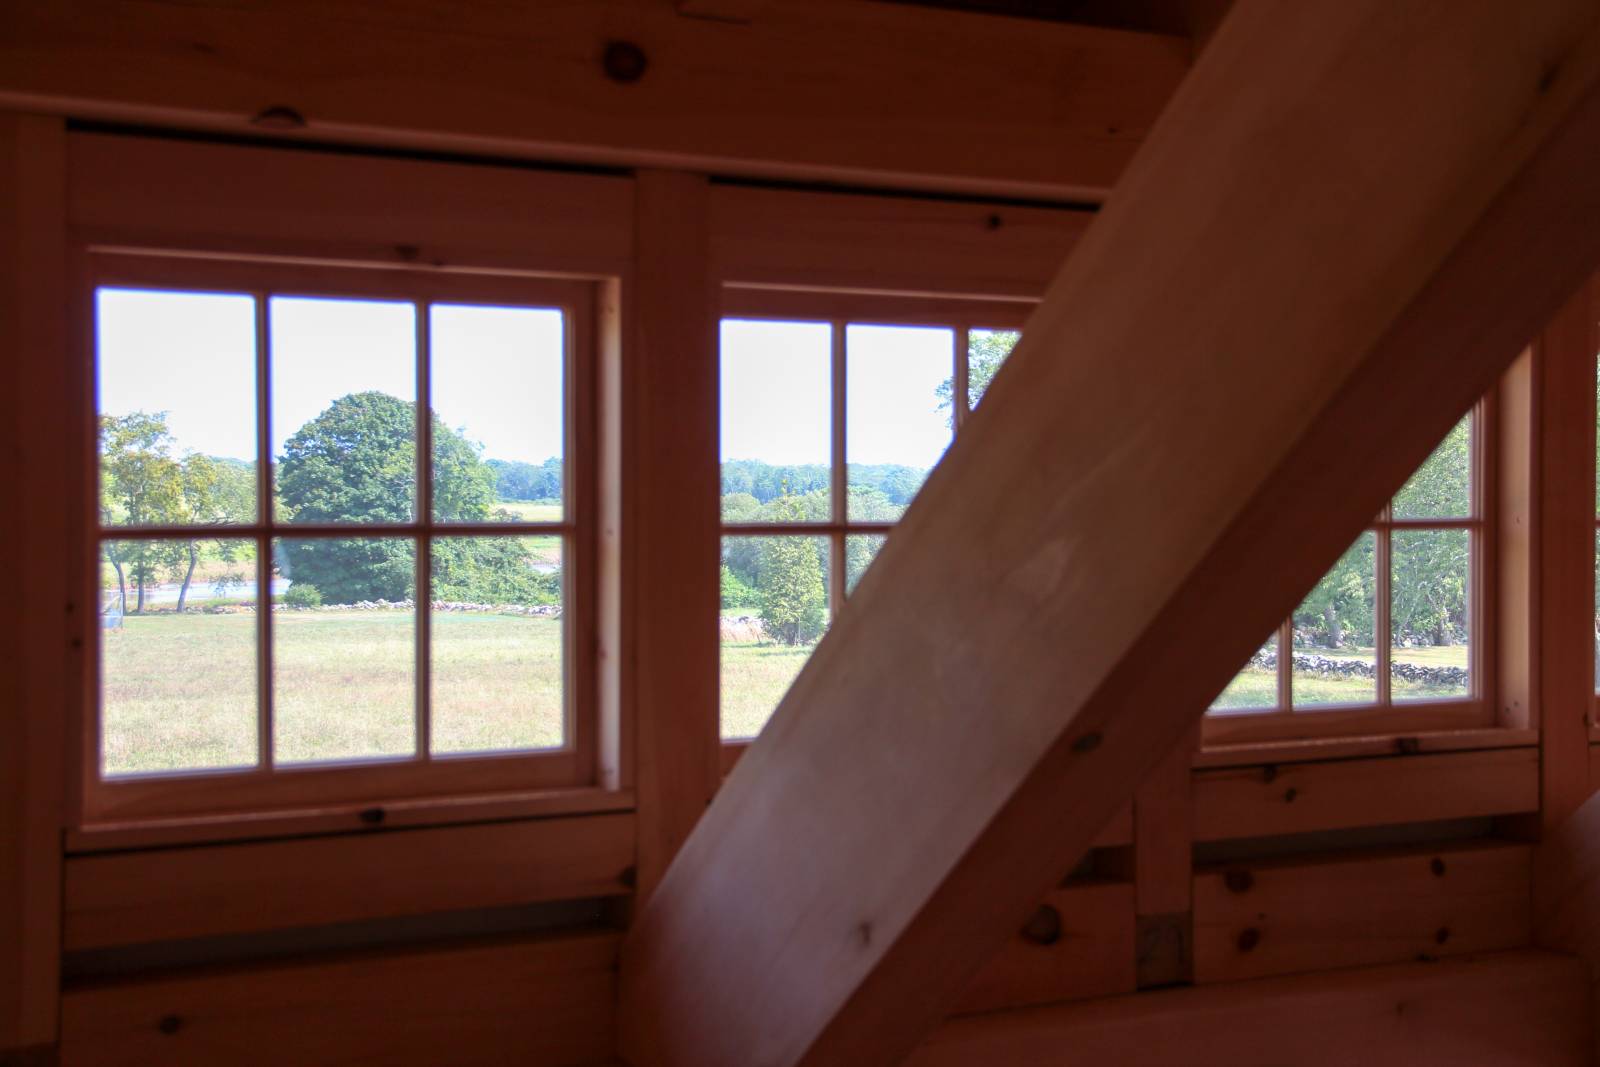 View of the ocean from transom dormer